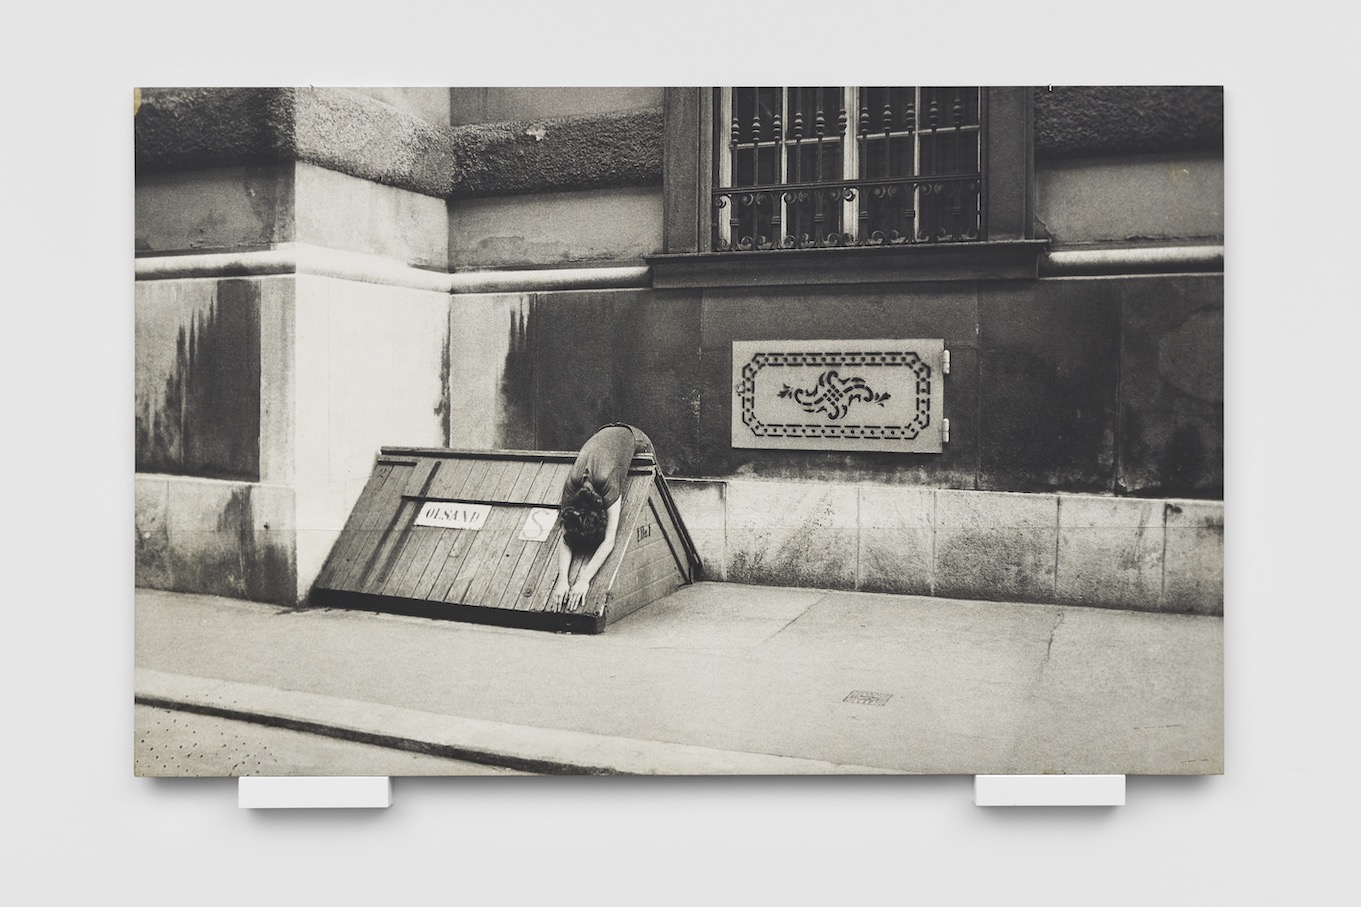 Black and white image of a woman draped over the built environment on a sidewalk in Vienna